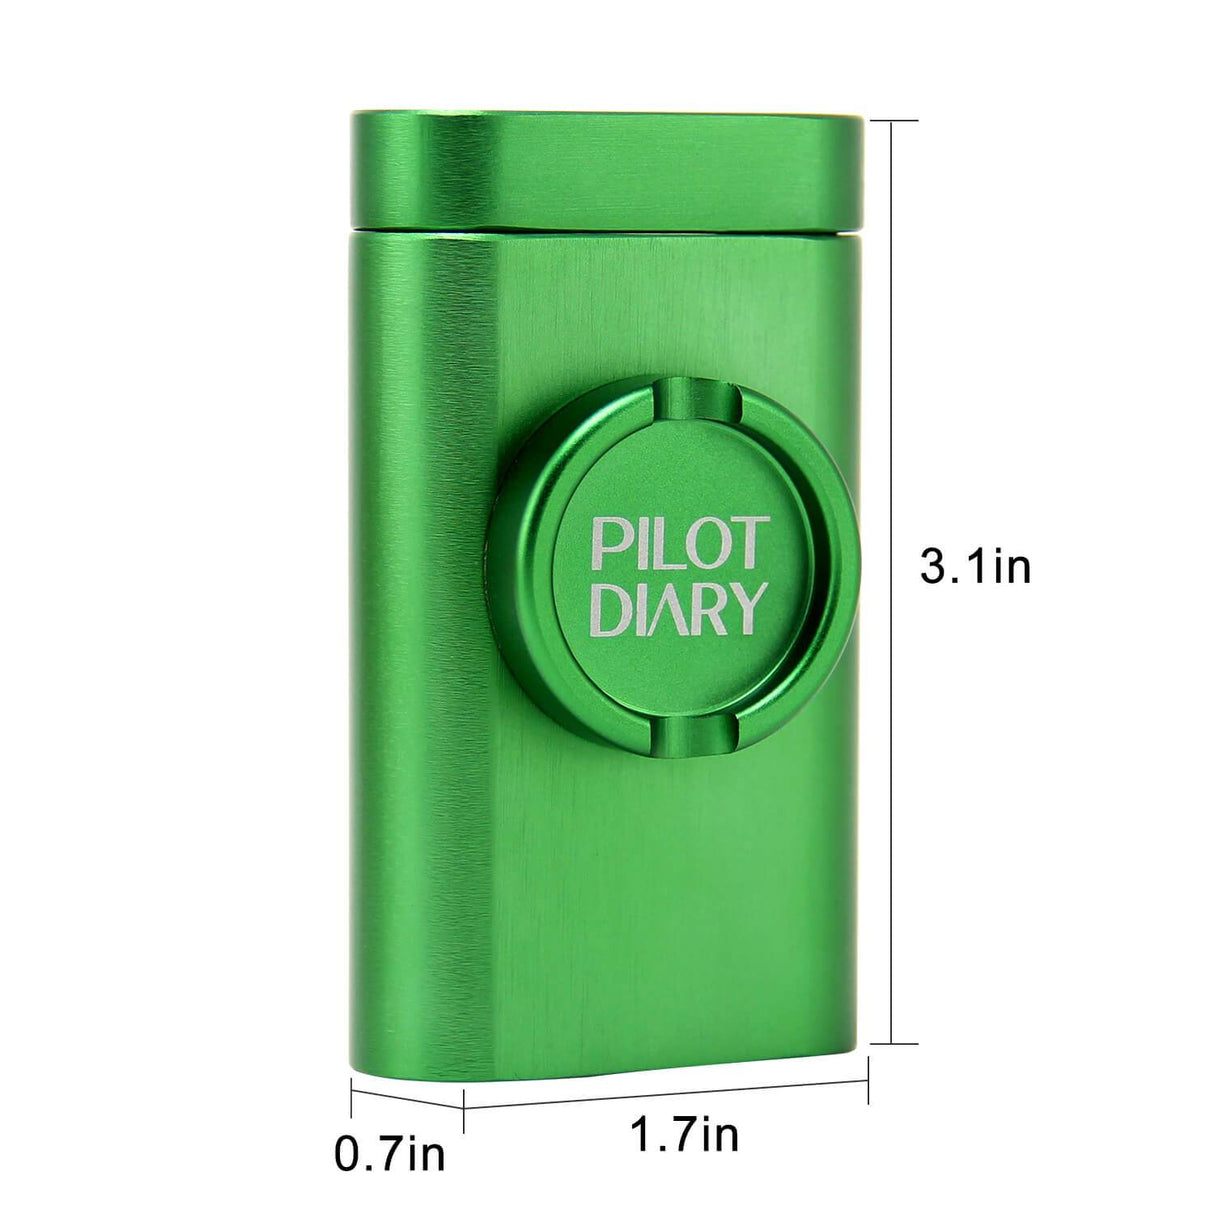 PILOT DIARY Green Dugout with Built-in Mini Grinder - Front View with Dimensions